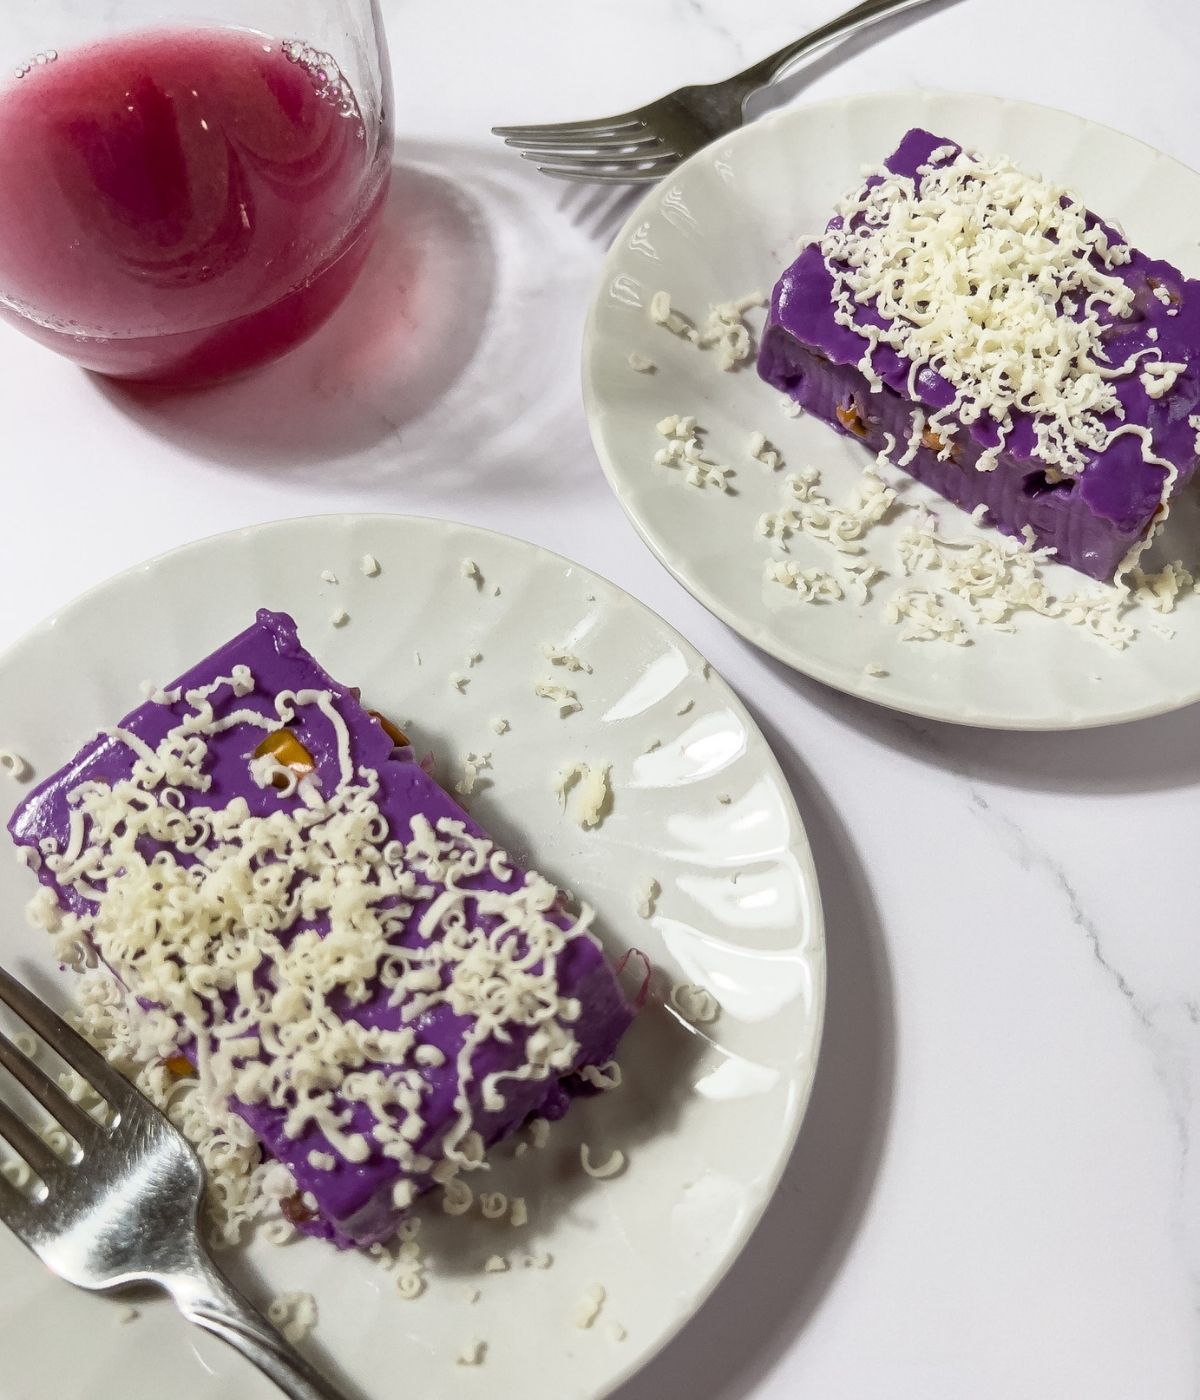 Ube maja blanca in two plates with drink.